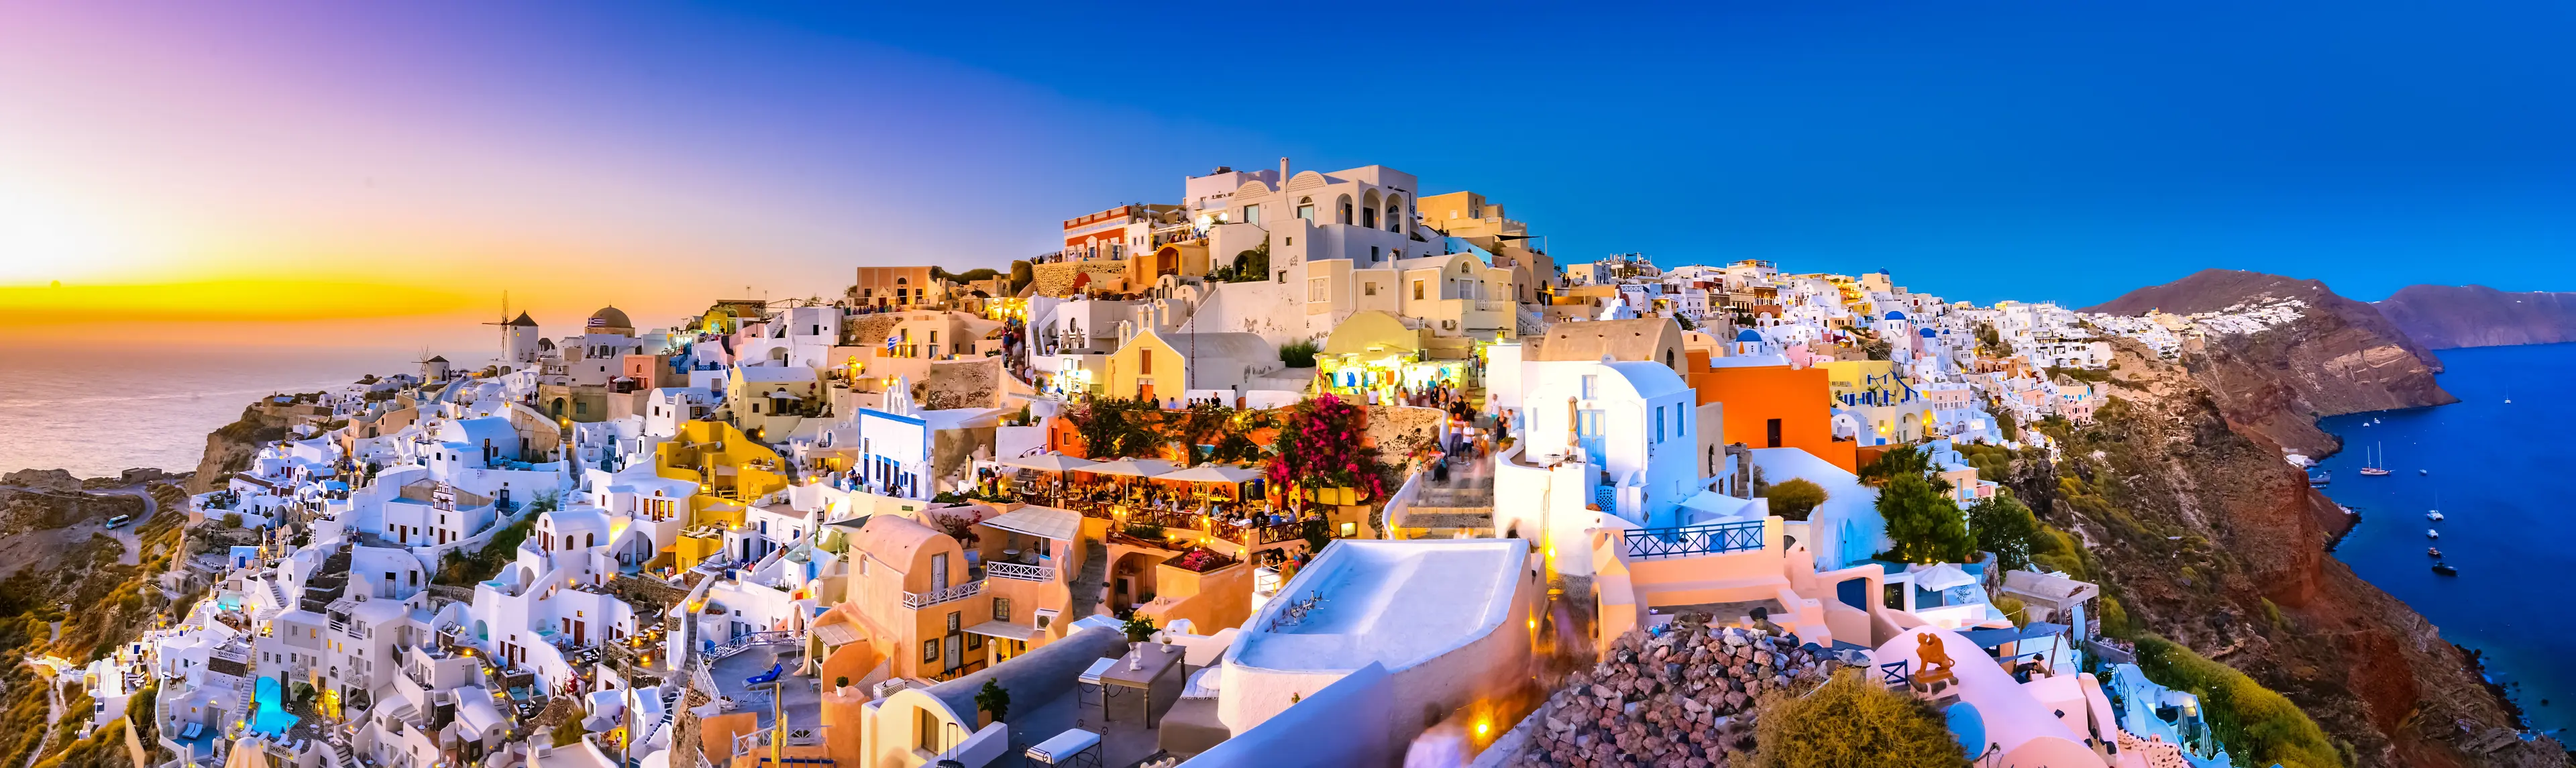 3-Day Off-Beat Adventure & Wine Tasting with Friends in Santorini